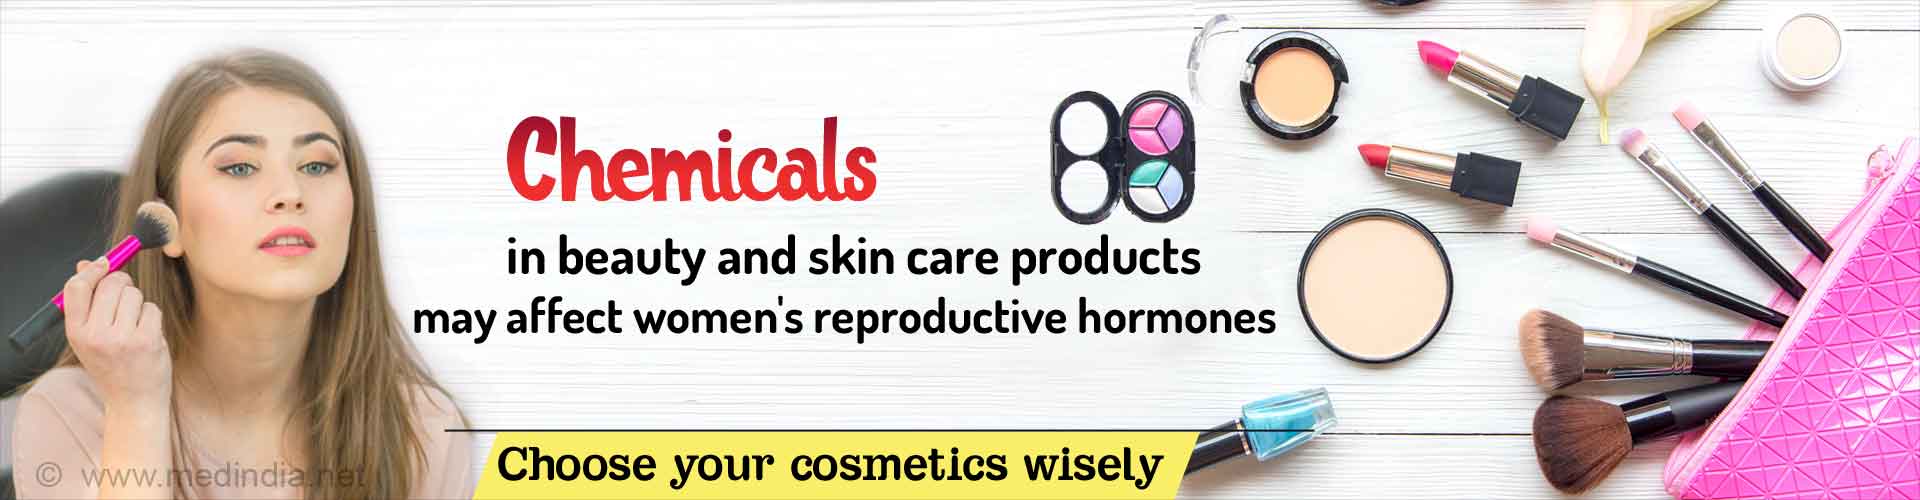 Chemicals in beauty and skin care products may affect women's reproductive hormones. Choose your cosmetics wisely.